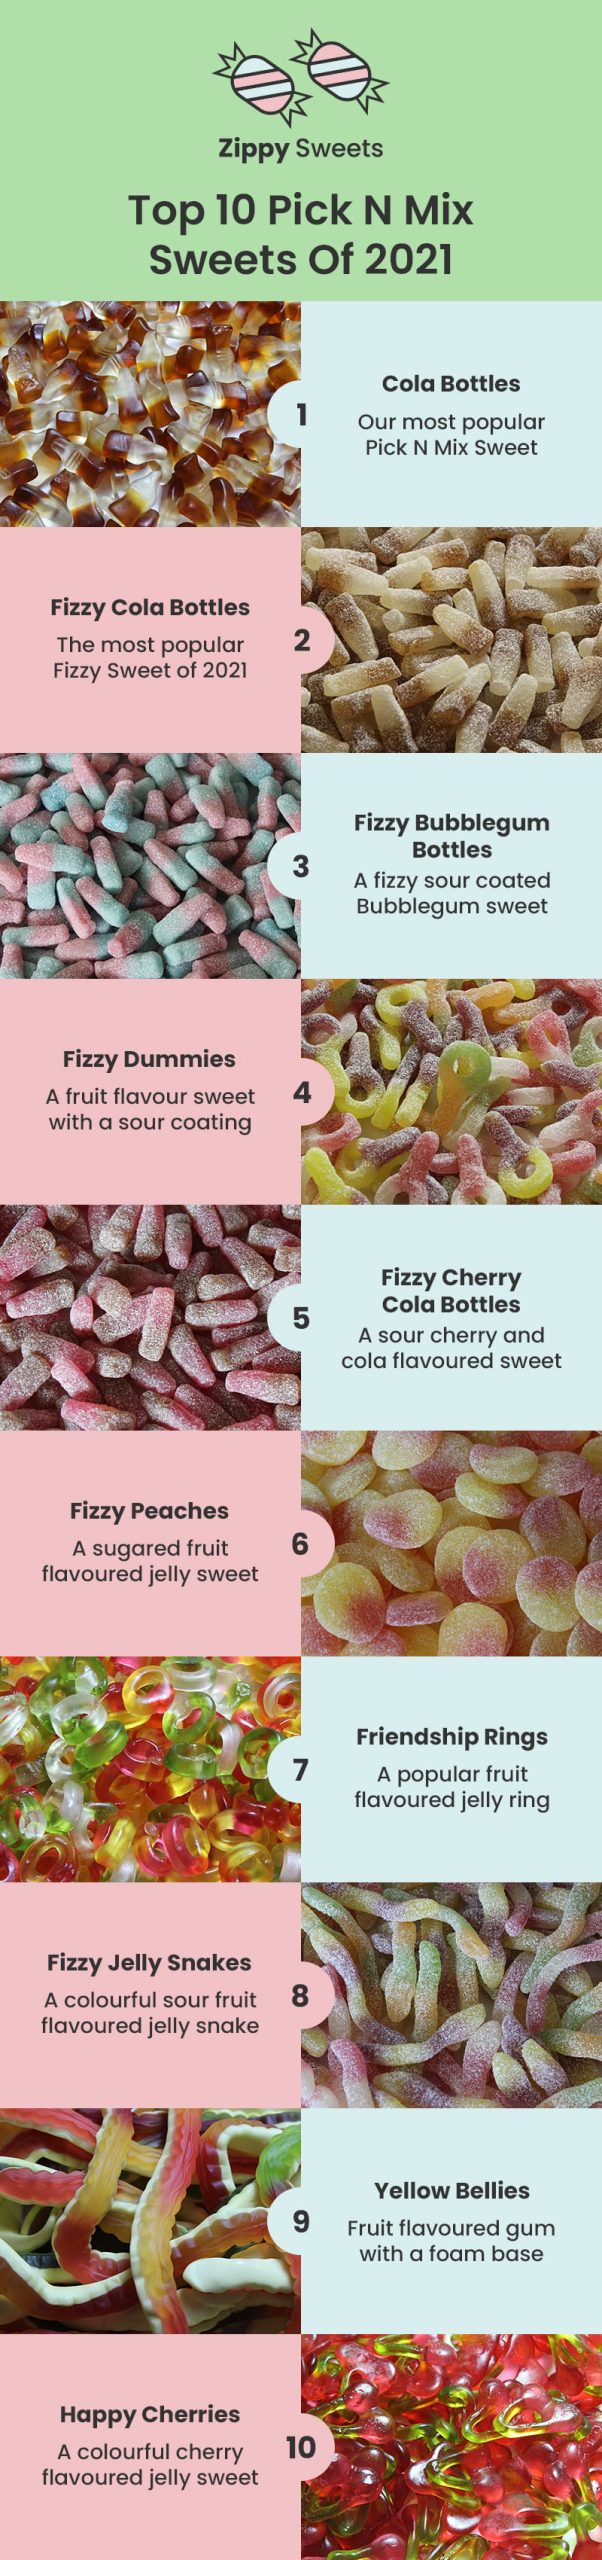 Pick N Mix Sweets Infographic